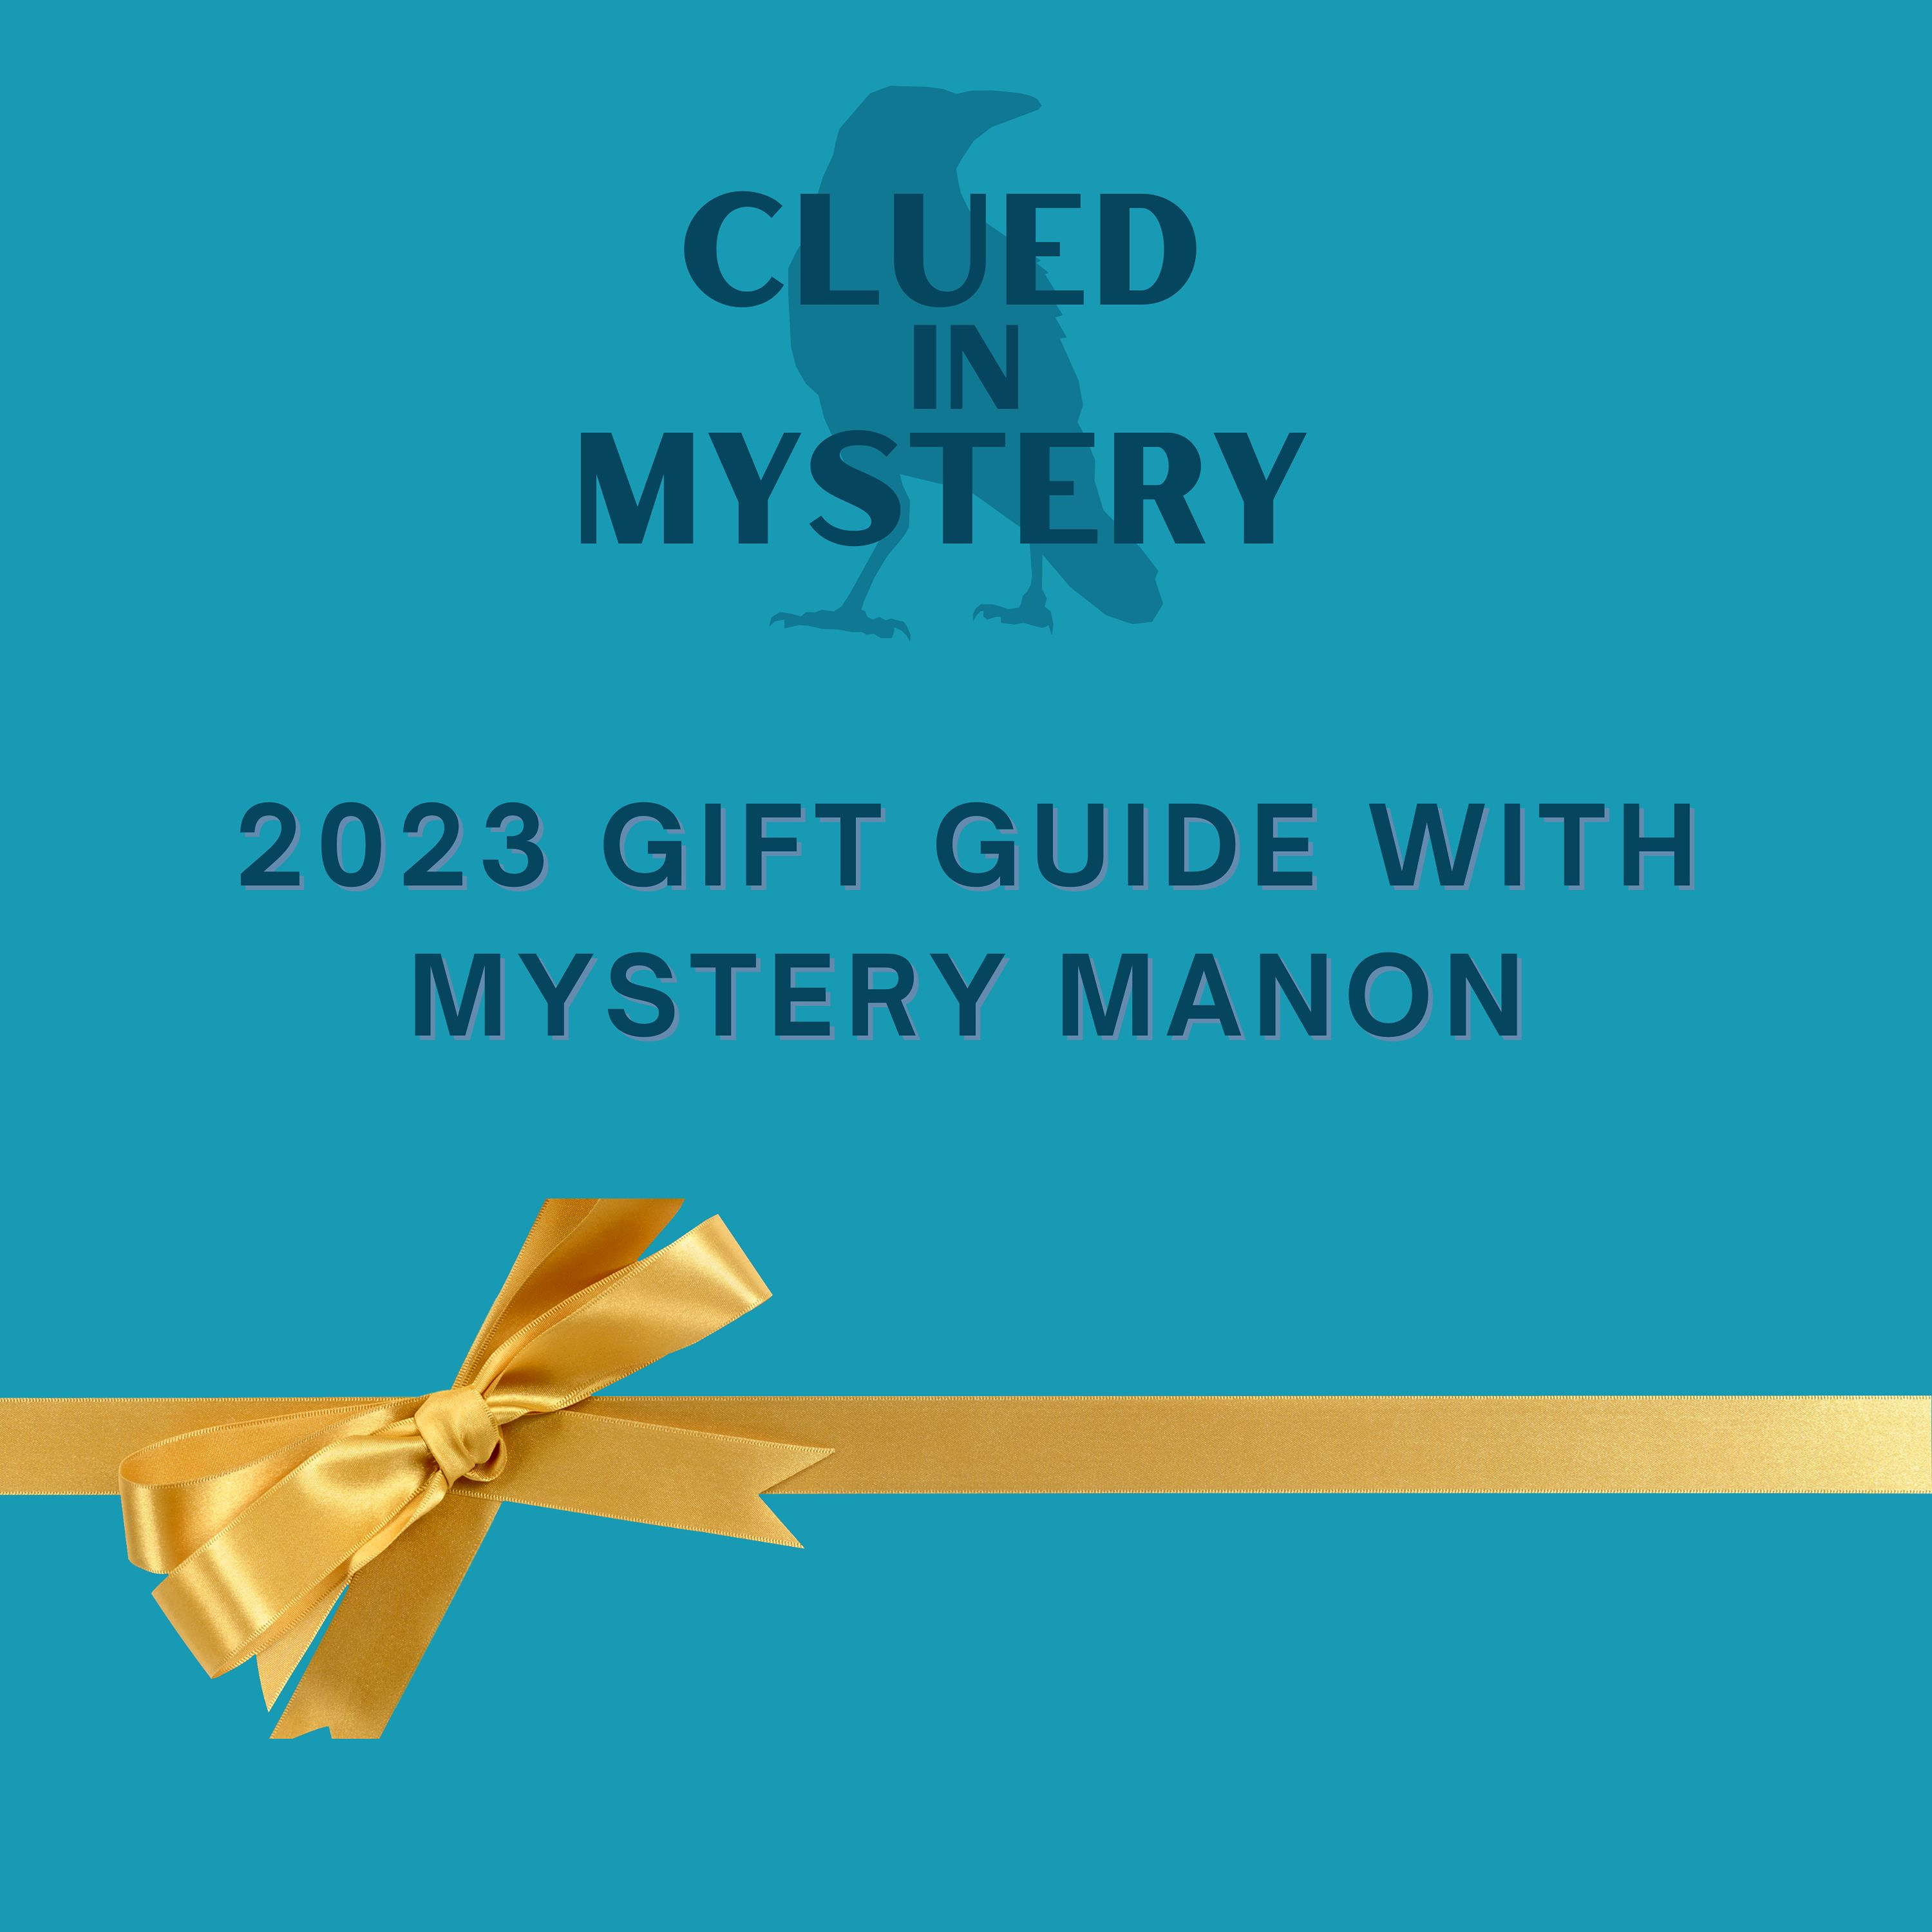 2023 Gift Guide with Mystery Manon